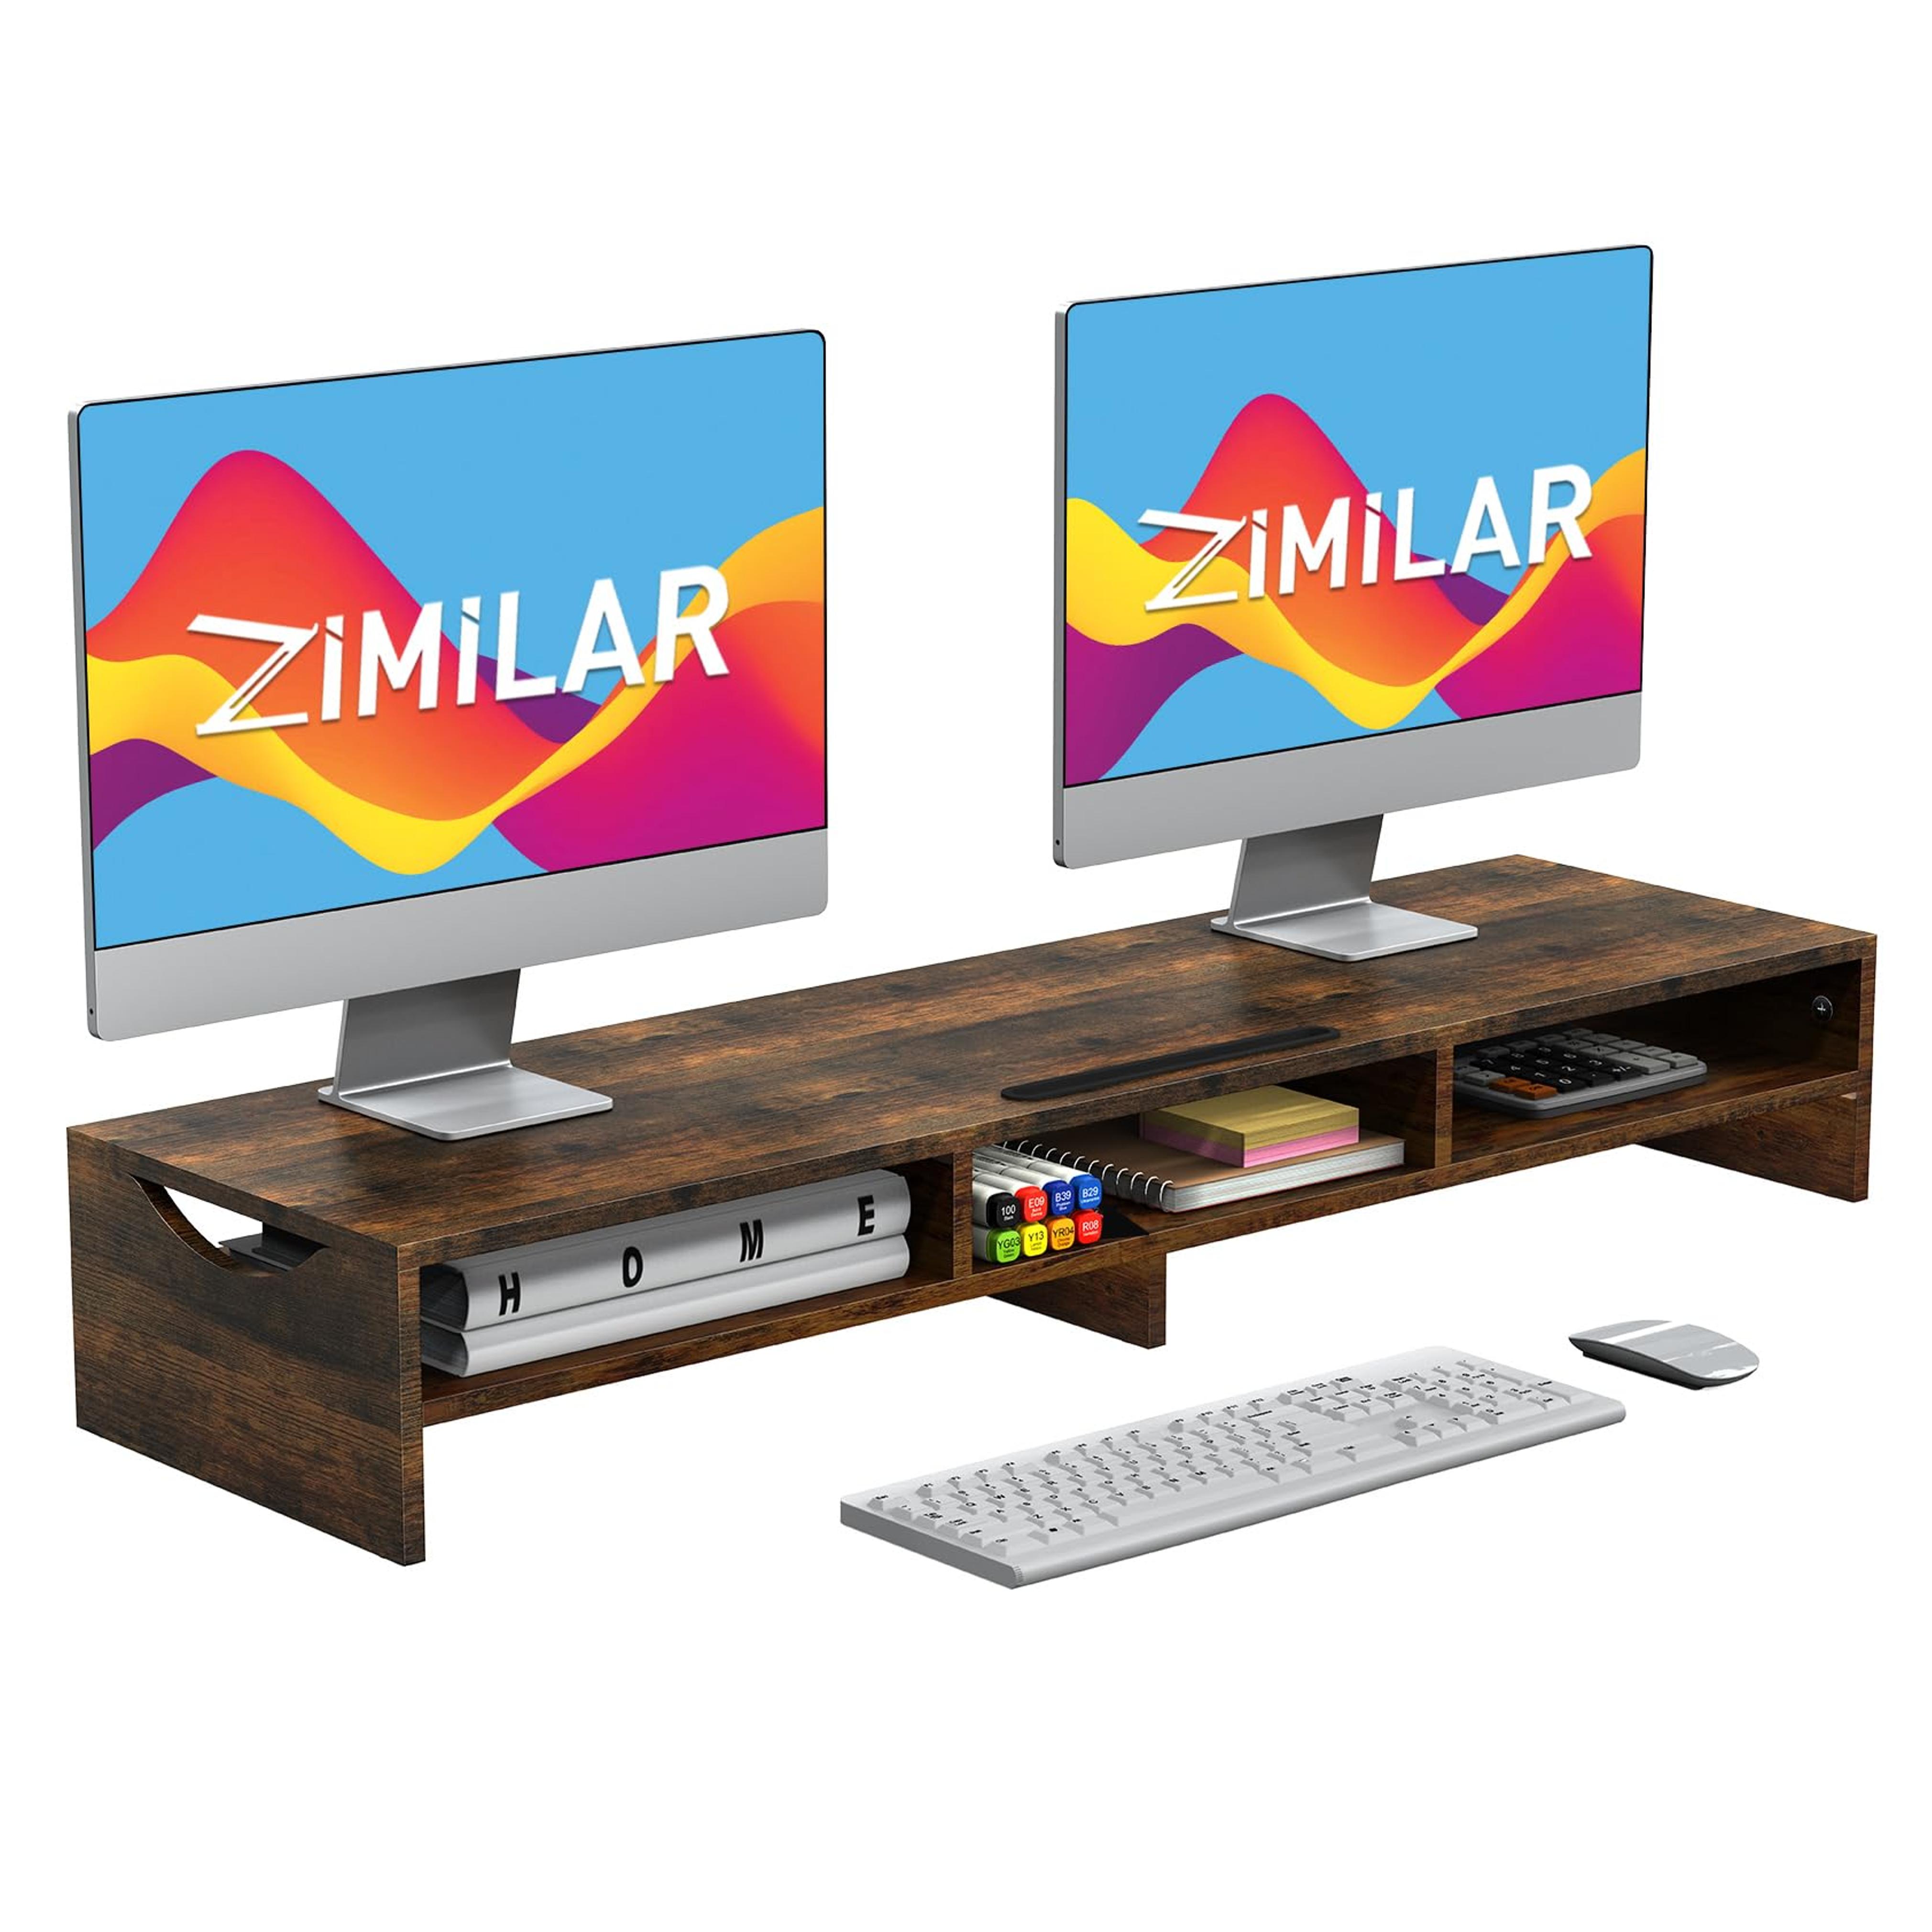 Zimilar Large Dual Monitor Stand Riser, 2 Tiers Monitor Stand with Cellphone Holder, Wood Monitor Riser with Storage for Computer,Laptop, Monitor Stand Riser for 2 Monitors, Shelf Organizer for Desk